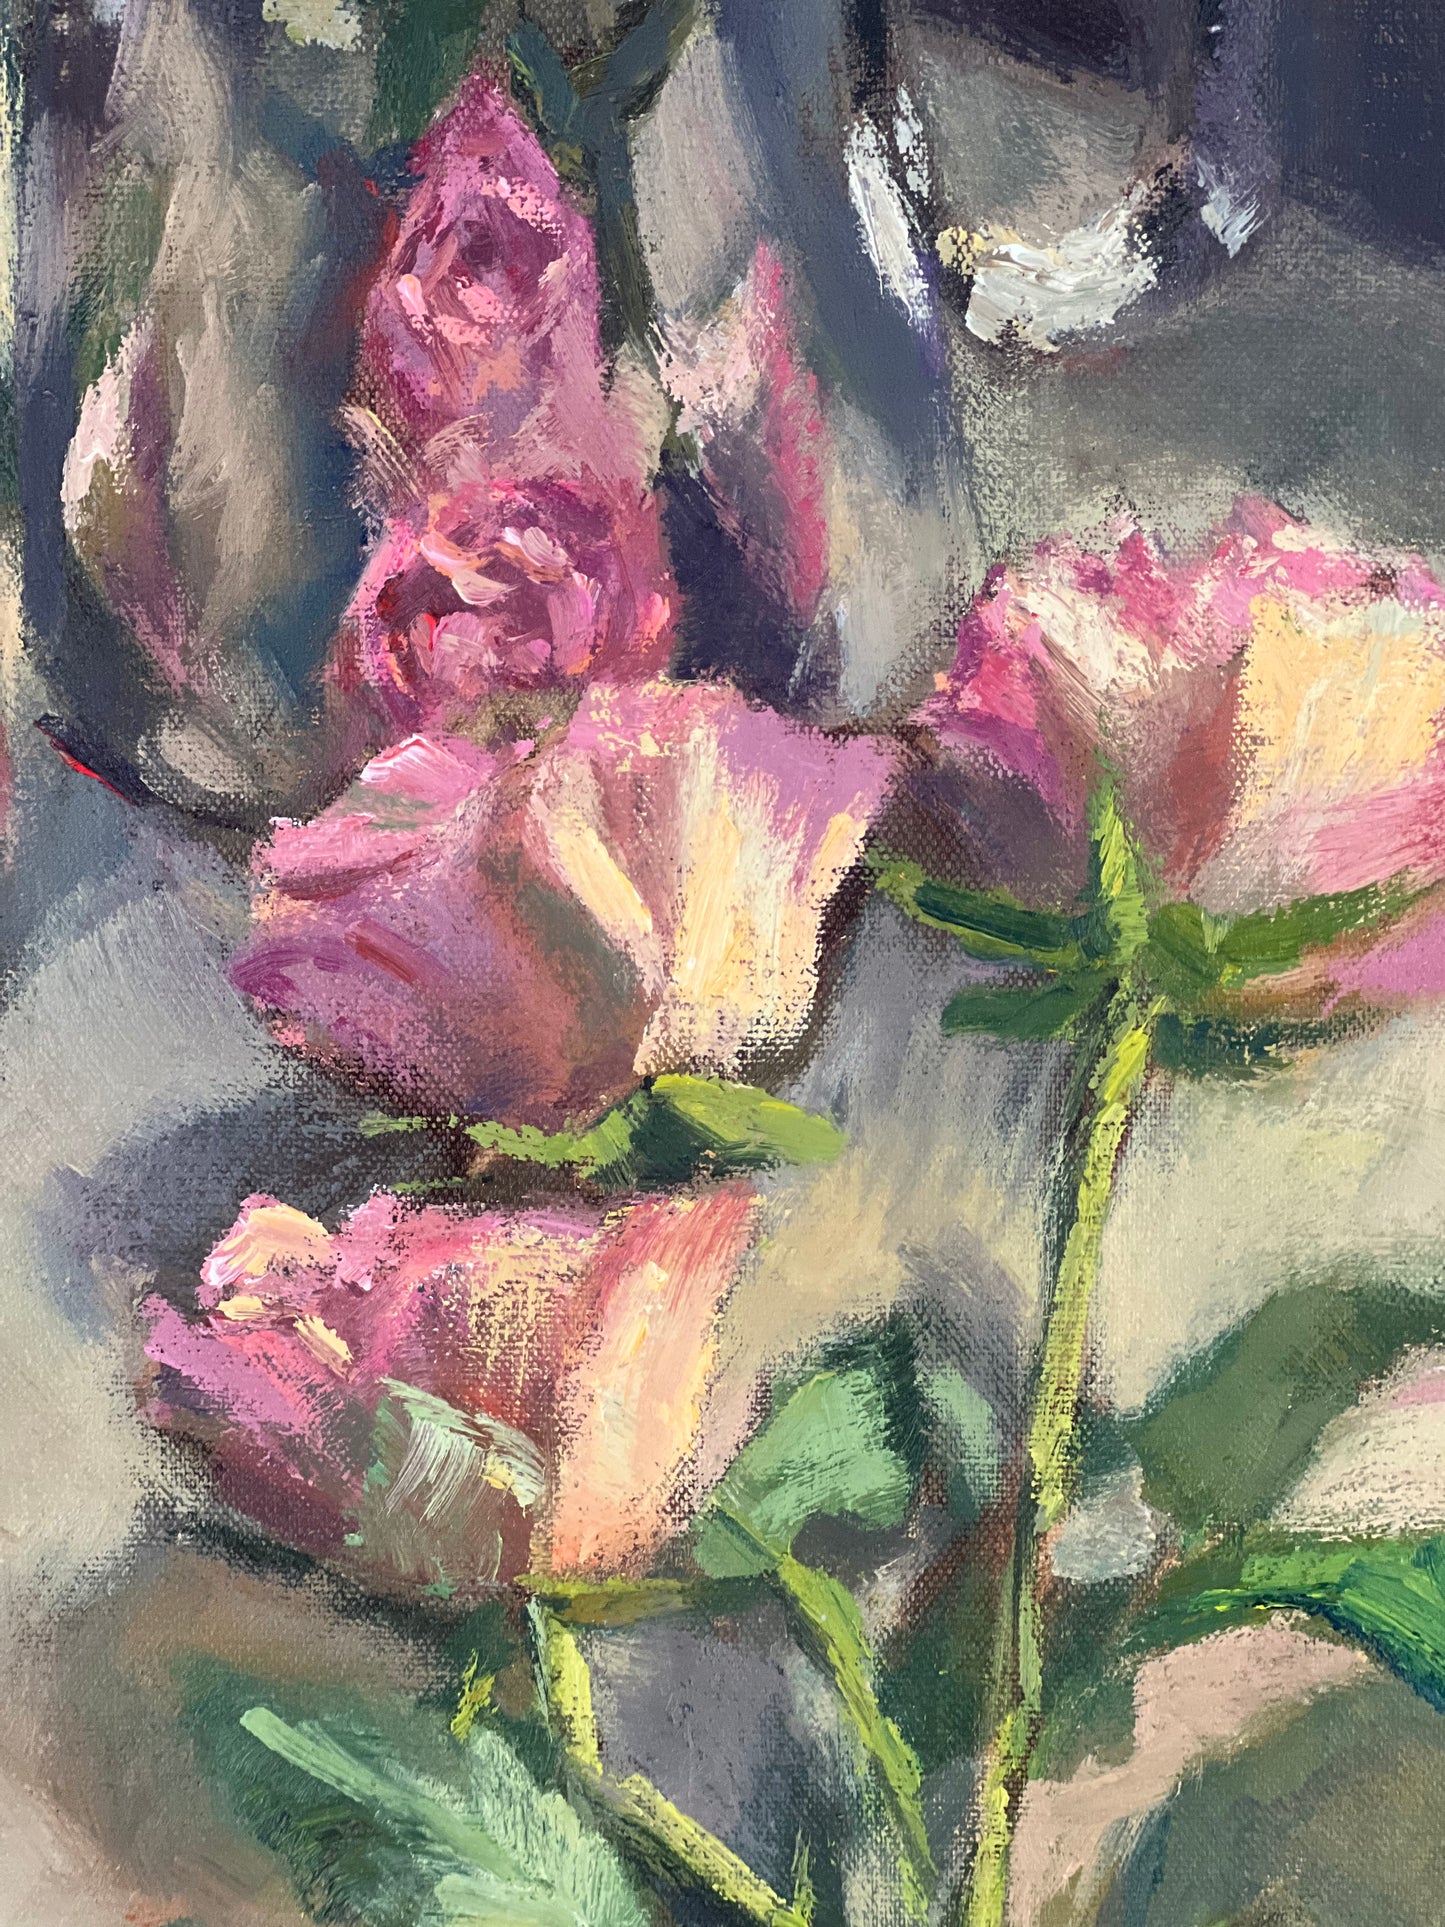 Roses and Reflections - Original Oil Painting